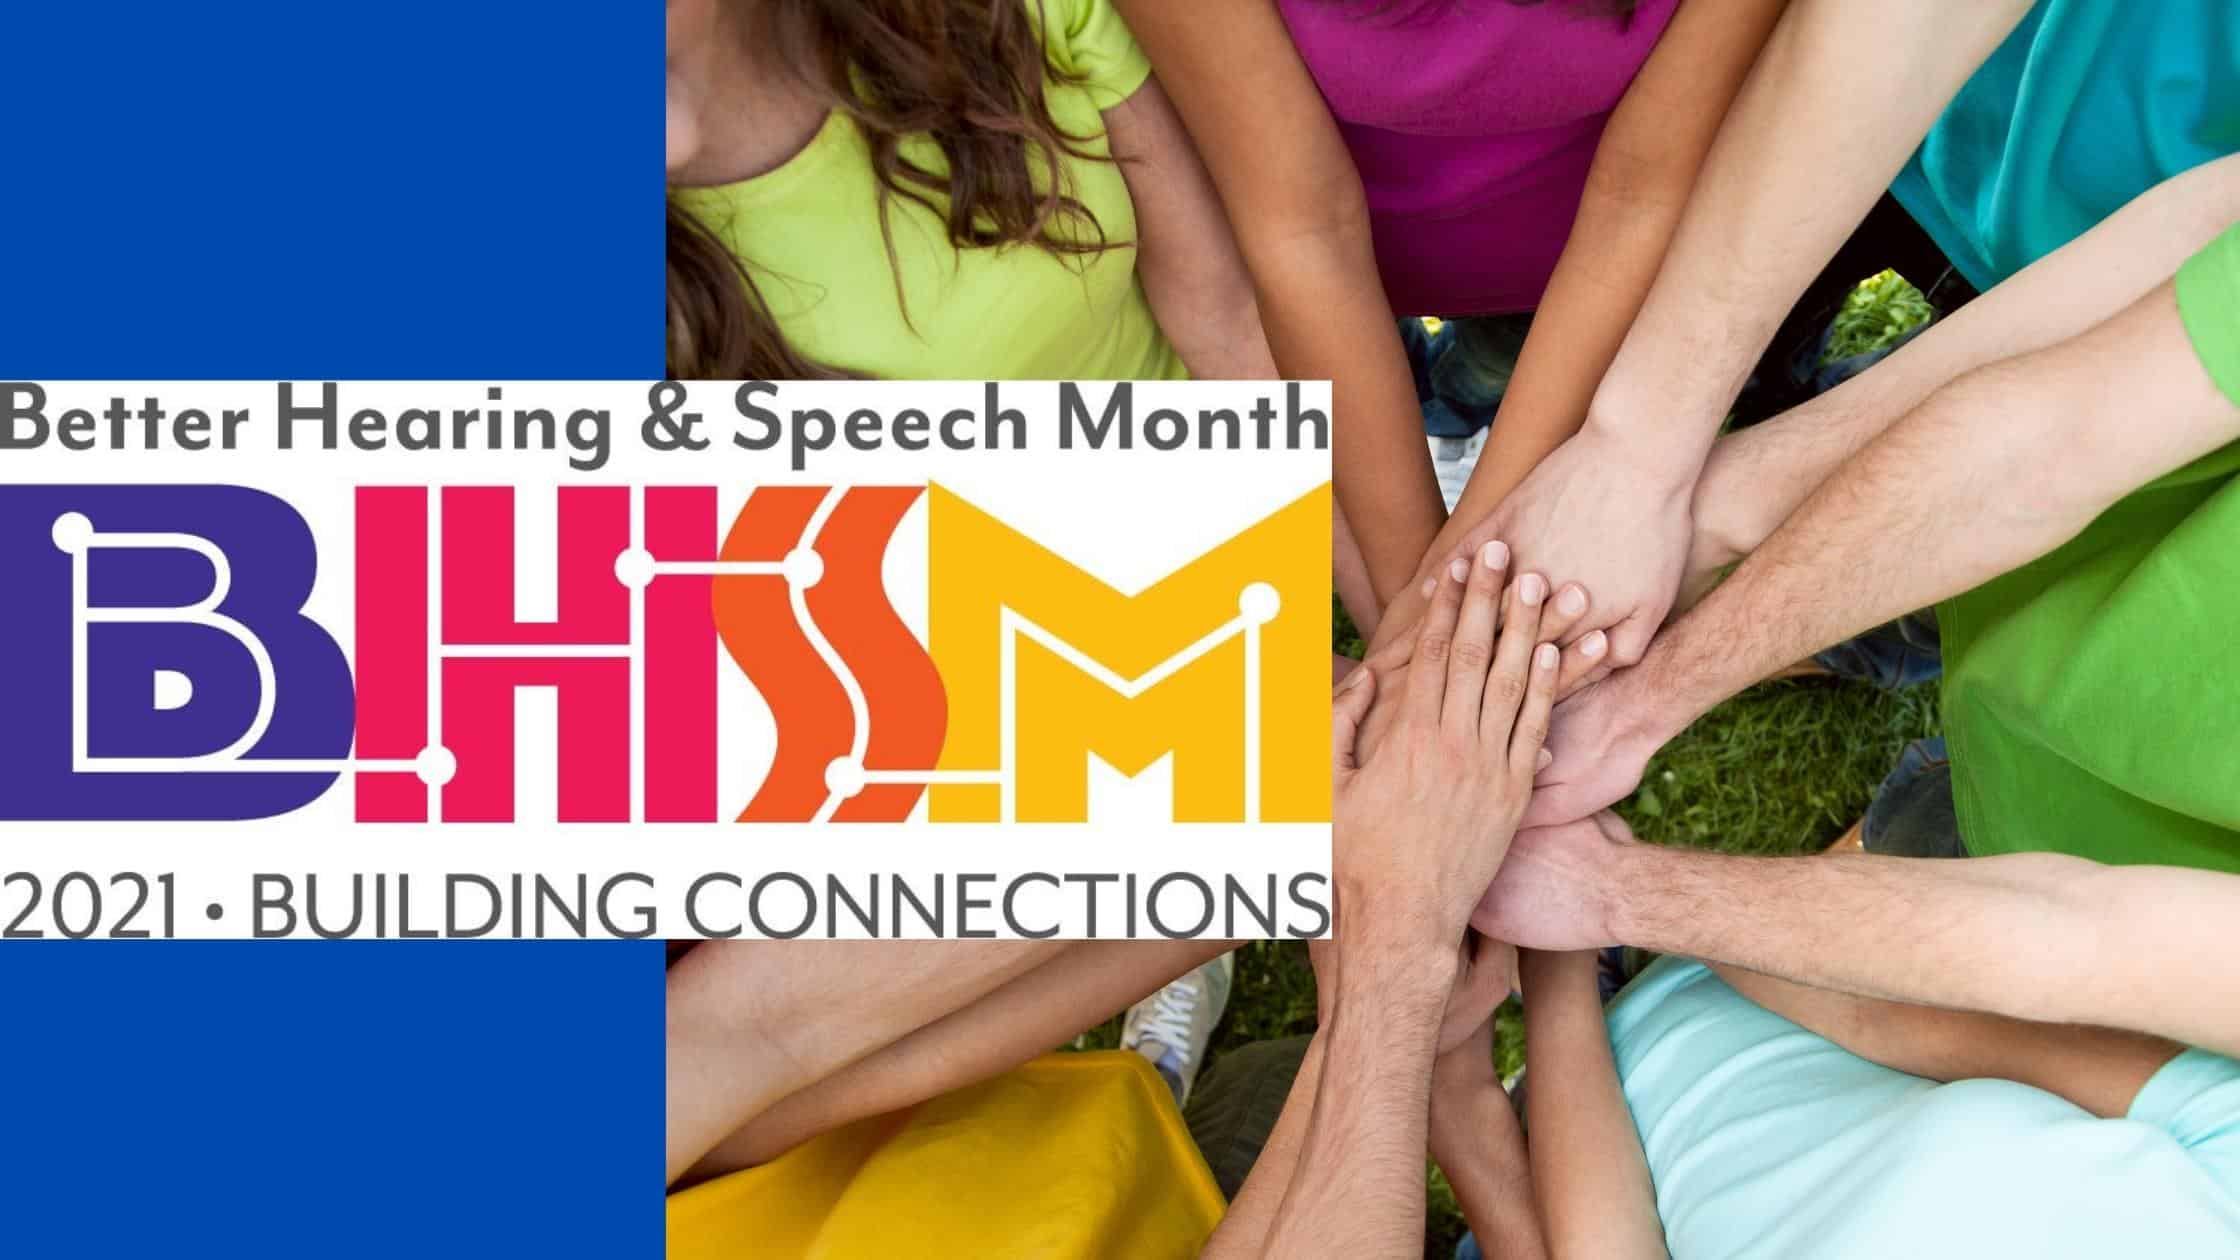 Building Connections May is Better Hearing and Speech Month